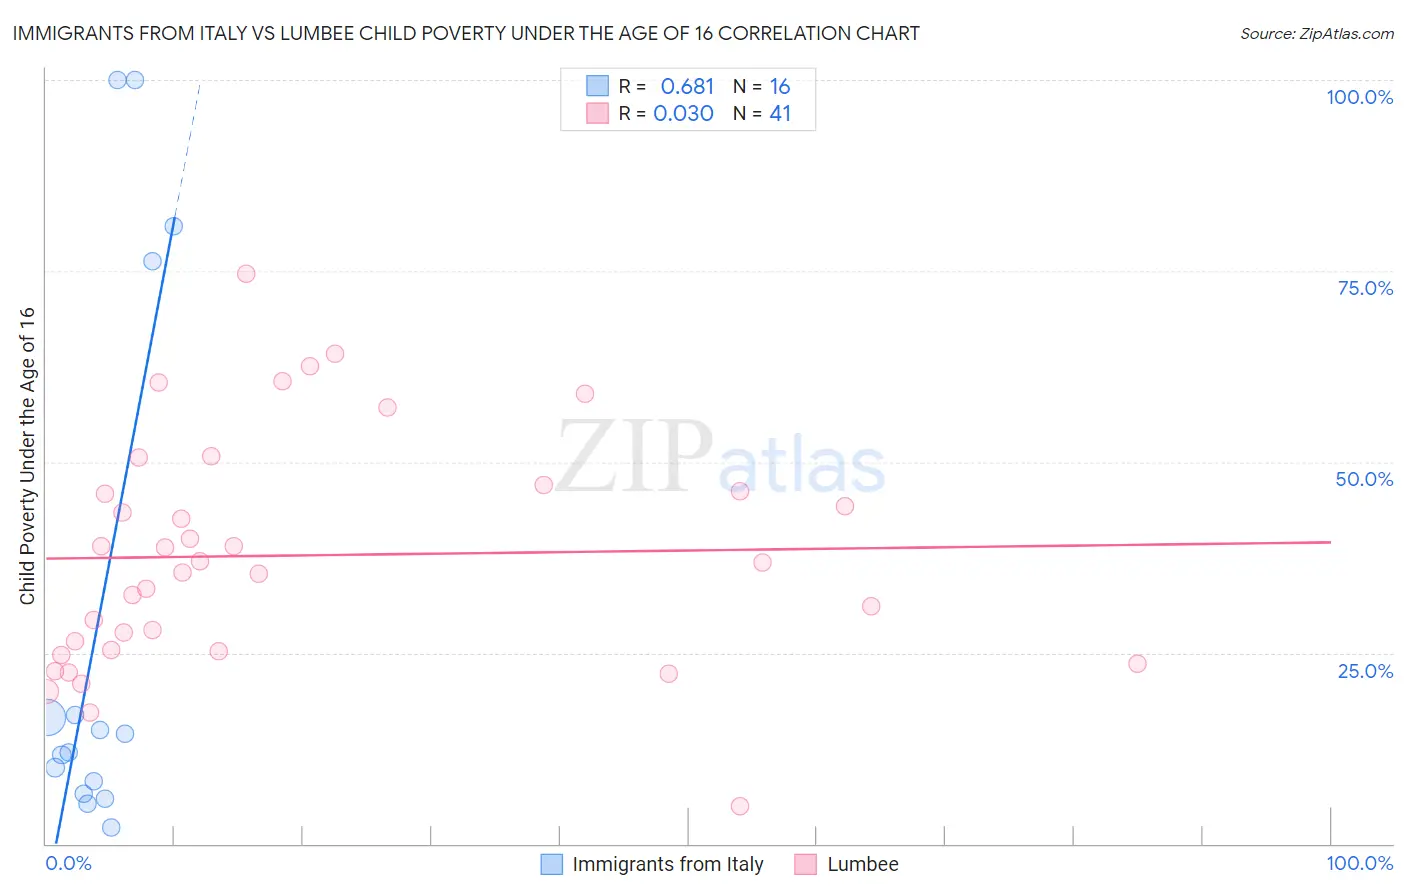 Immigrants from Italy vs Lumbee Child Poverty Under the Age of 16